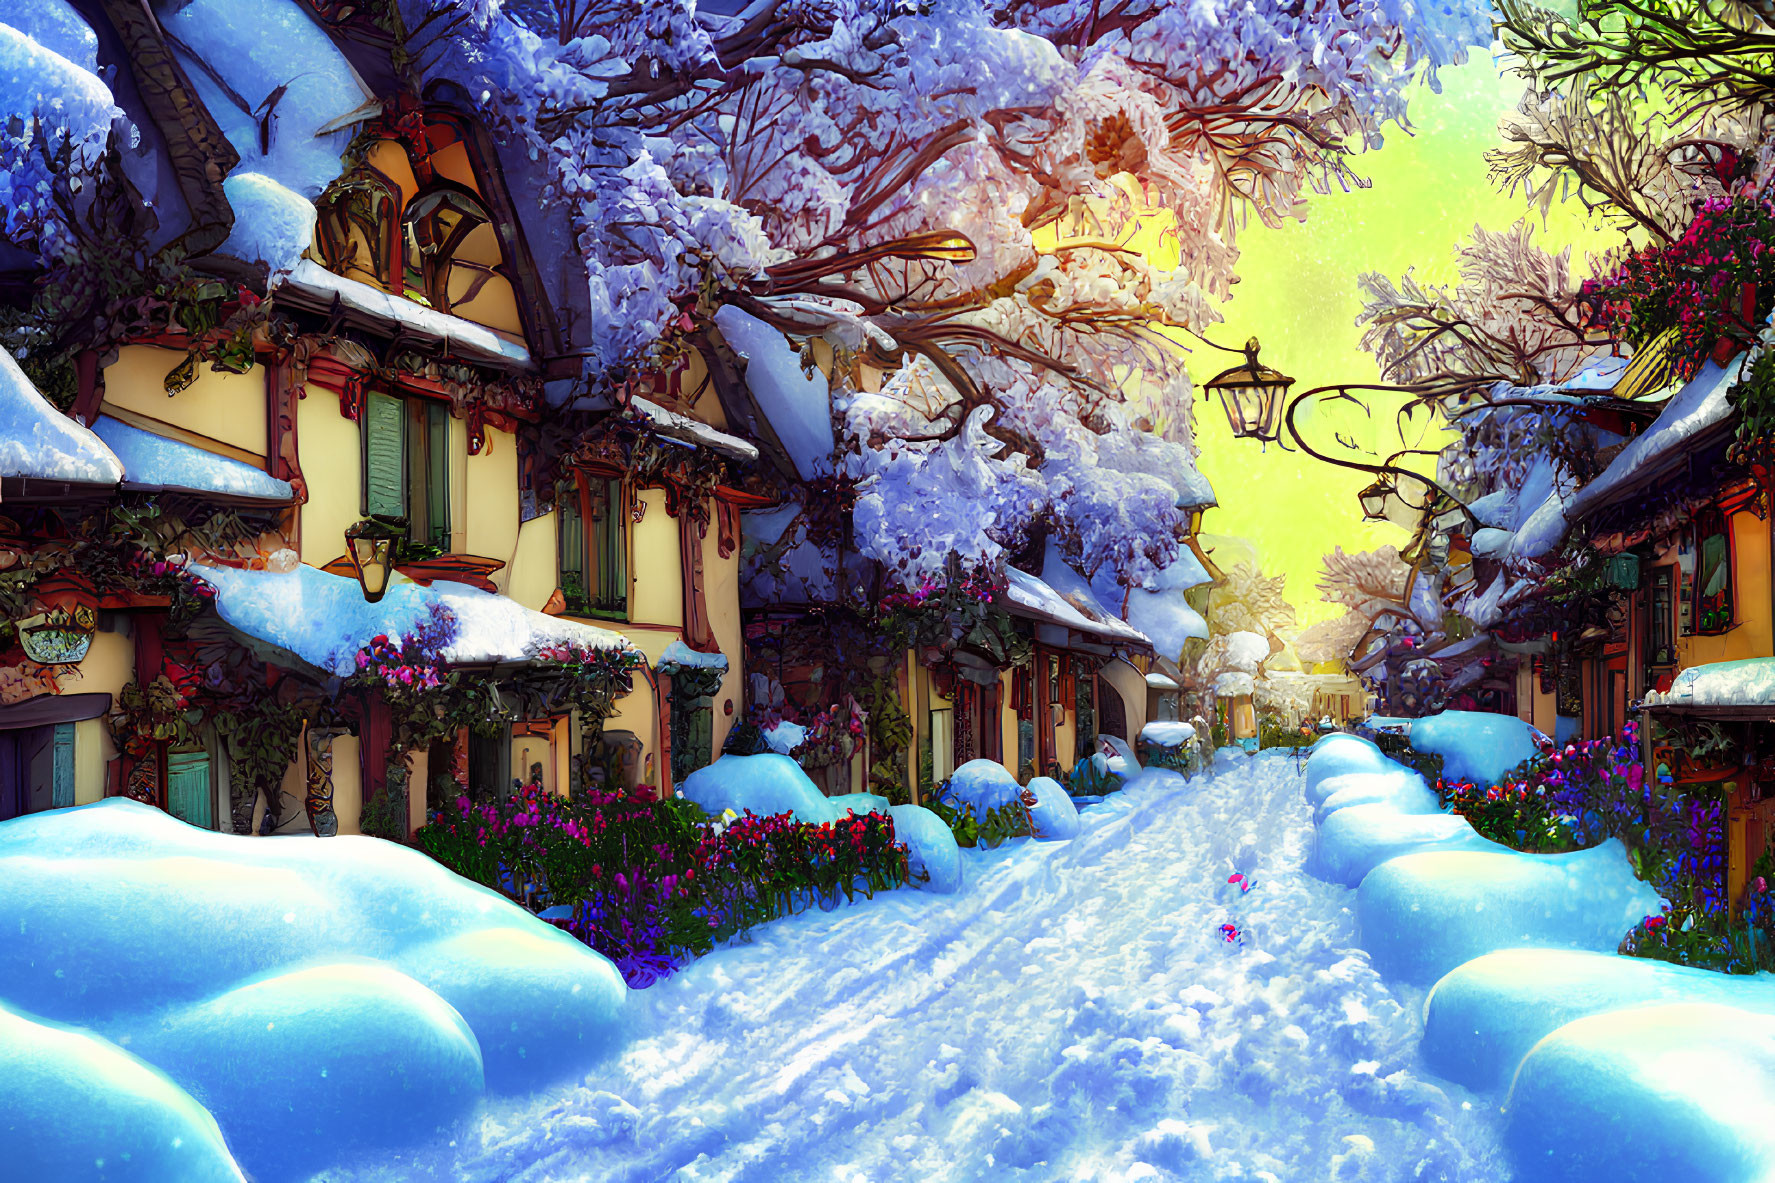 Snowy Village Street with Quaint Houses and Snow-Laden Trees